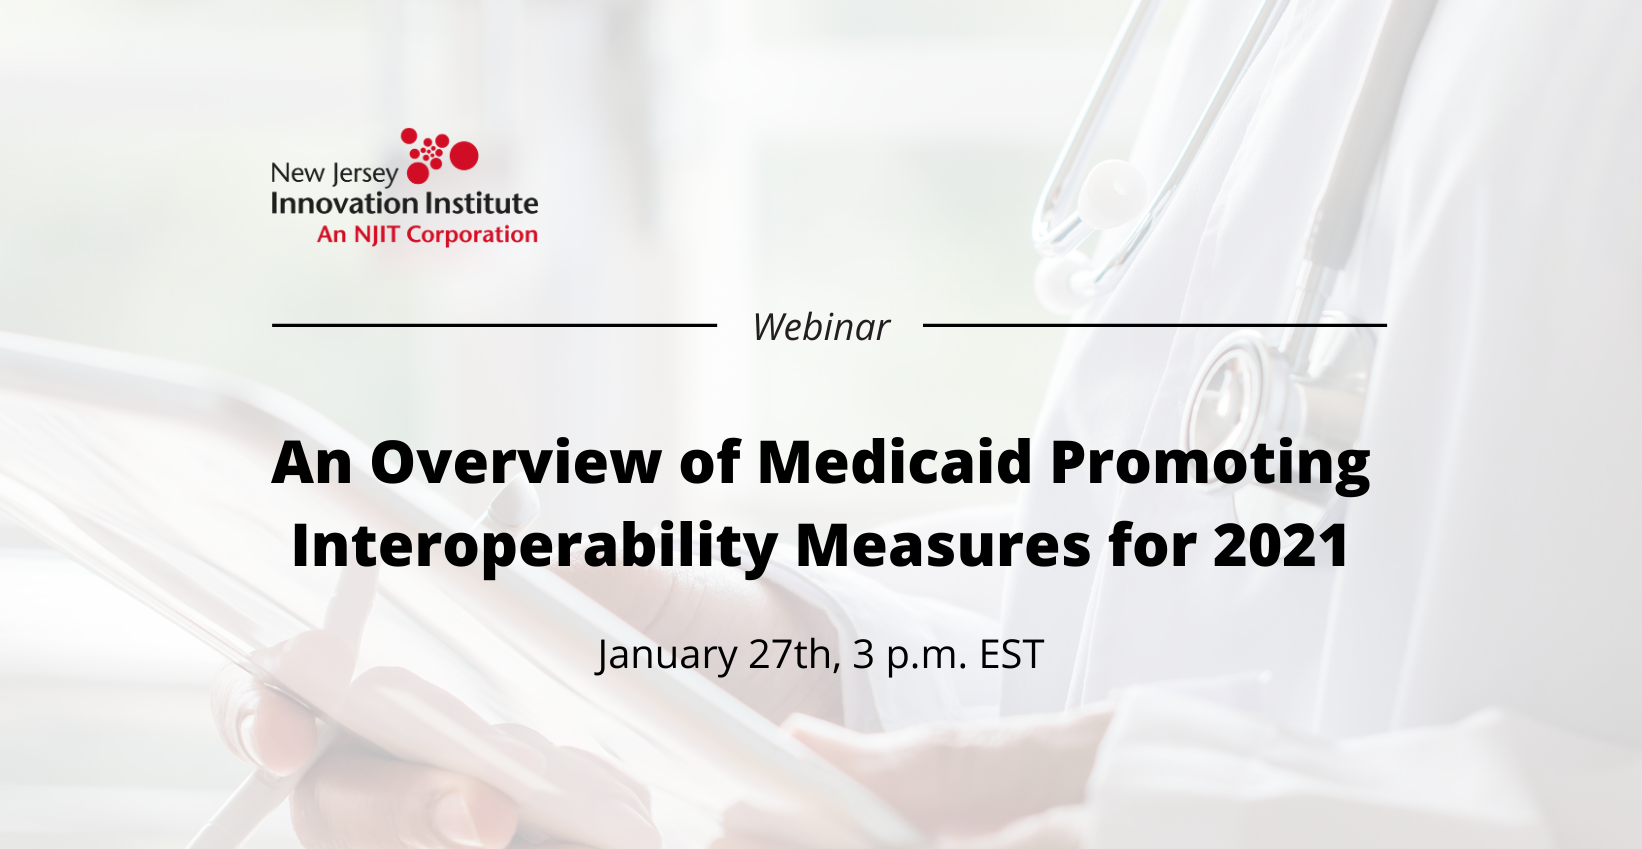 An Overview of Medicaid Promoting Interoperability Measures for 2021